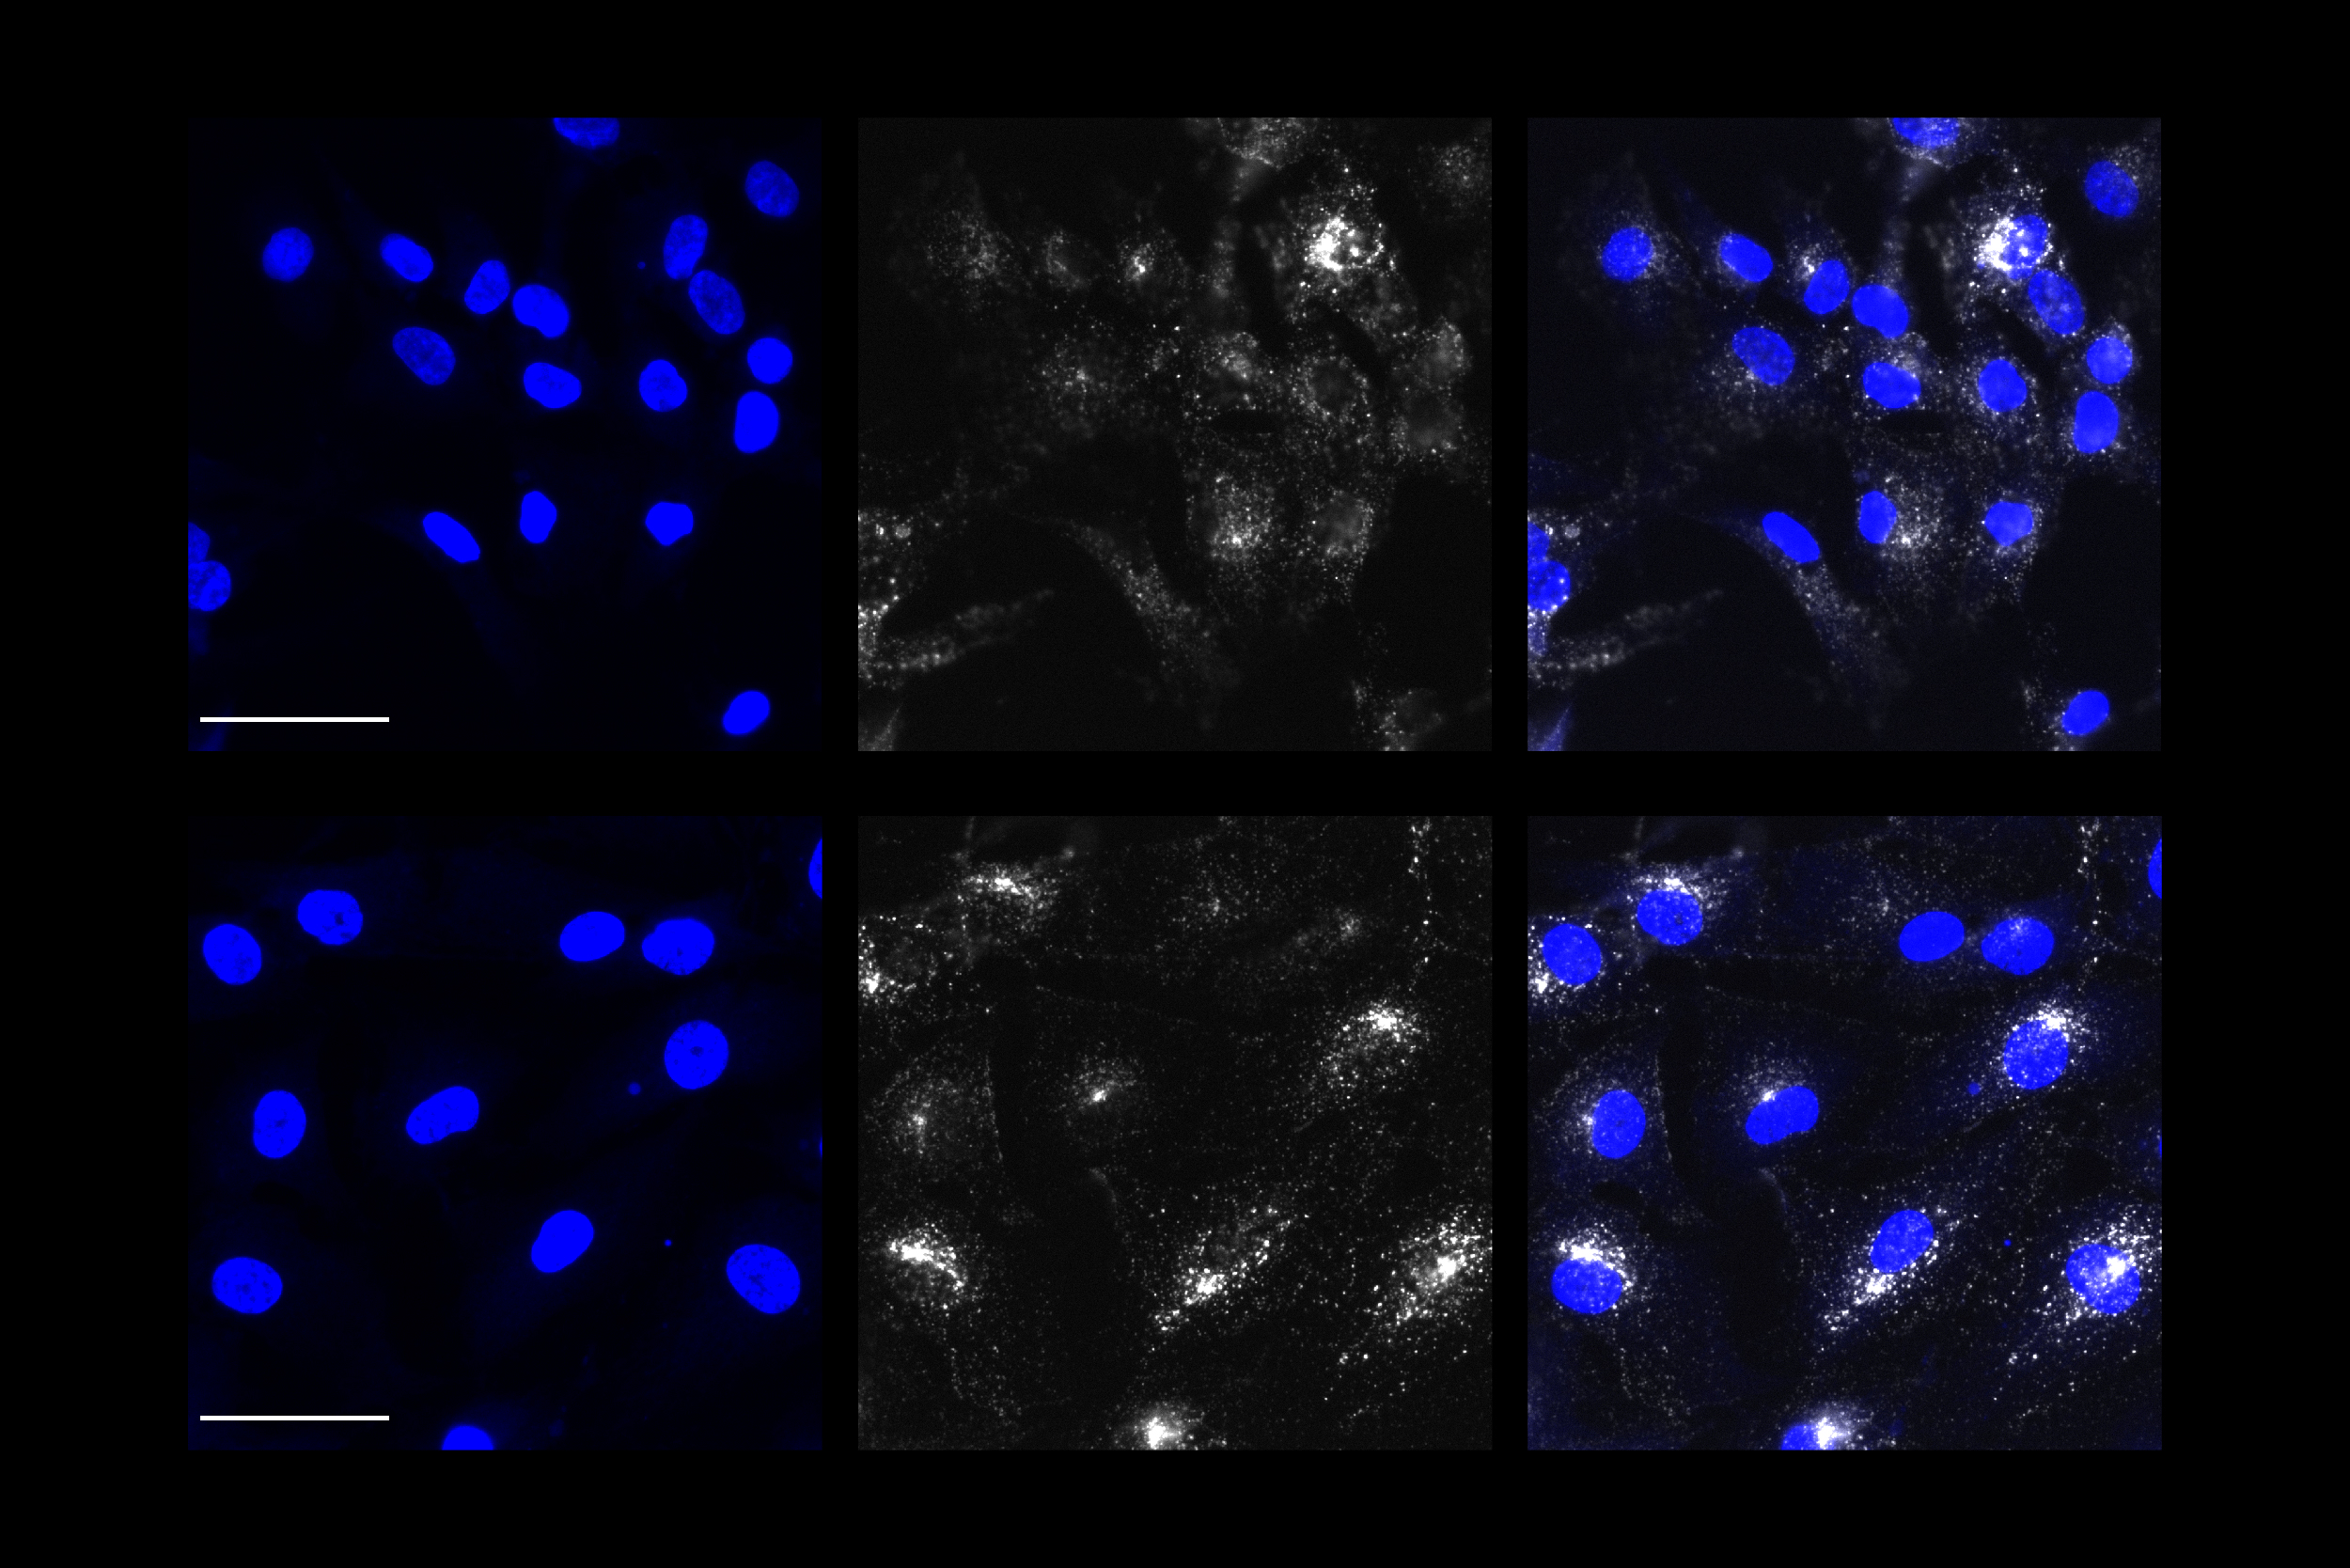 A 3 by 2 grid shows cells with blue and white staining